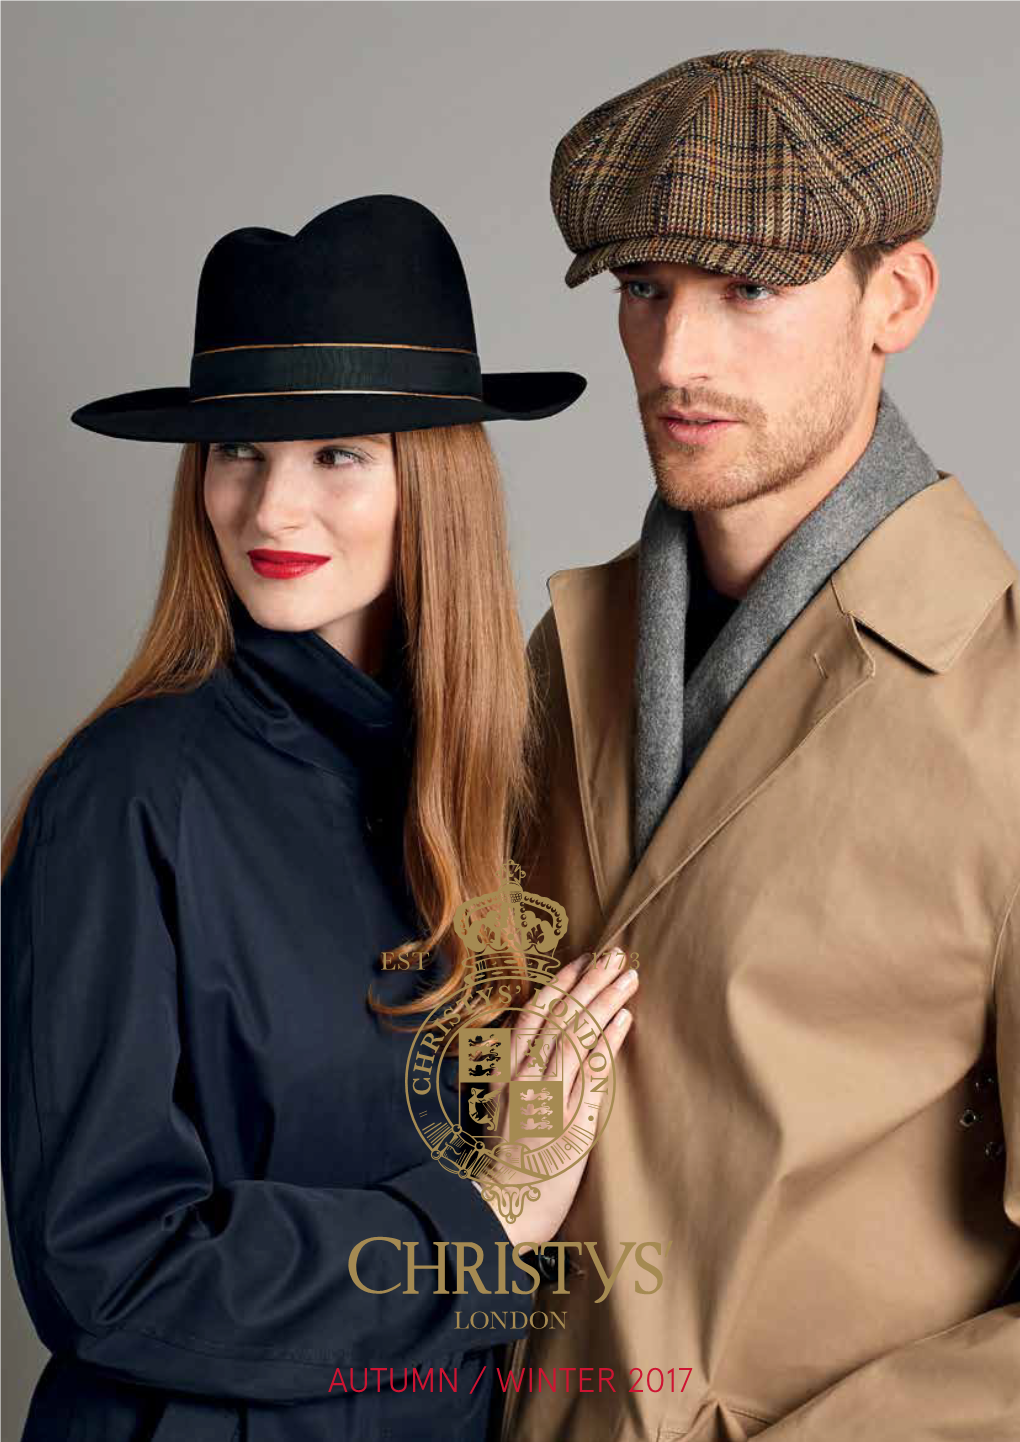 Autumn / Winter 2017 Great British Hat Makers Great British Hat Makers Autumn / Winter Collection 2017